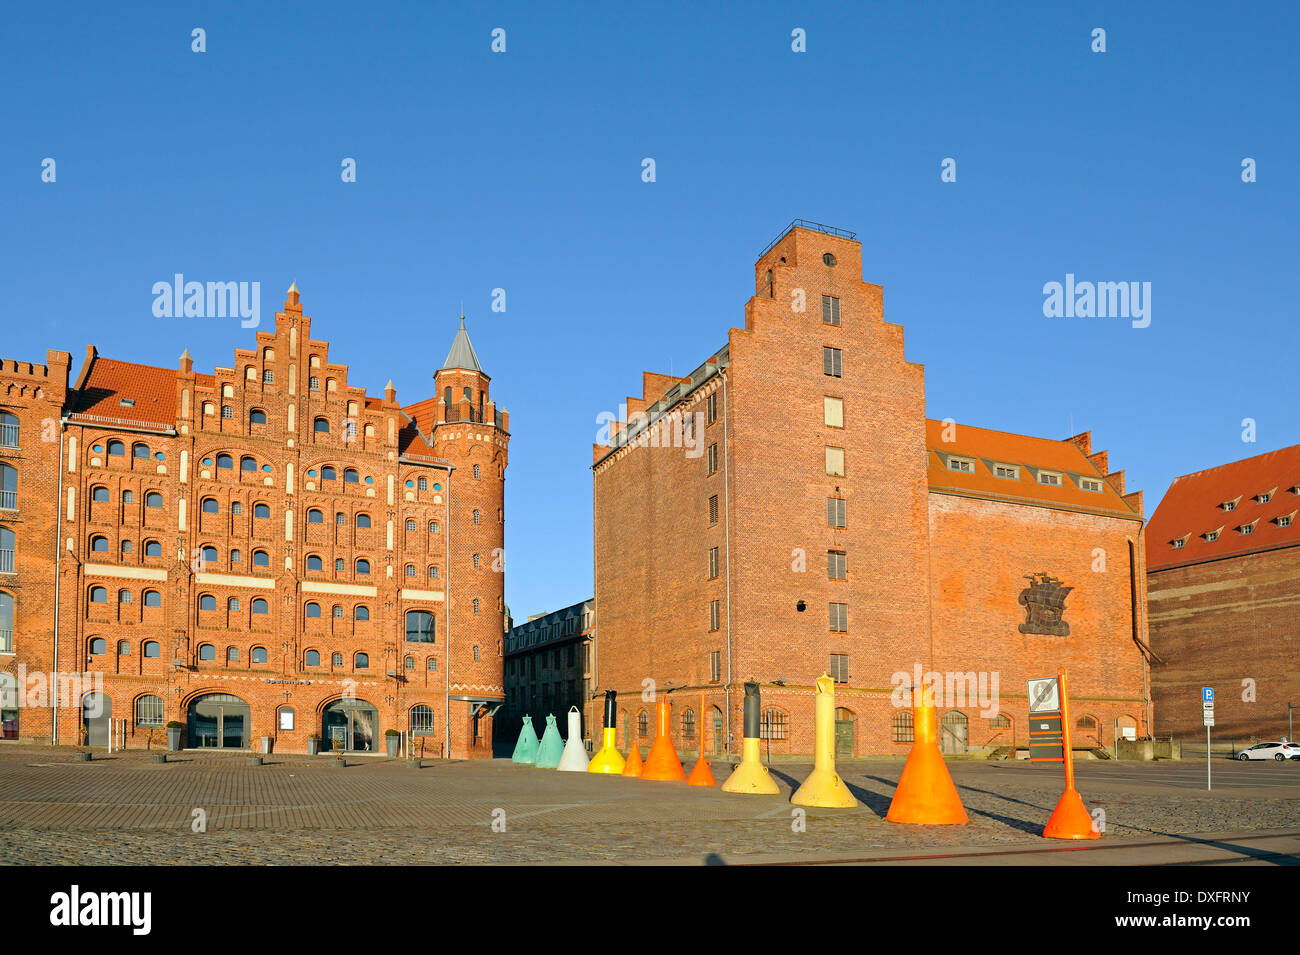 Page 3 - Storehouses High Resolution Stock Photography and Images - Alamy